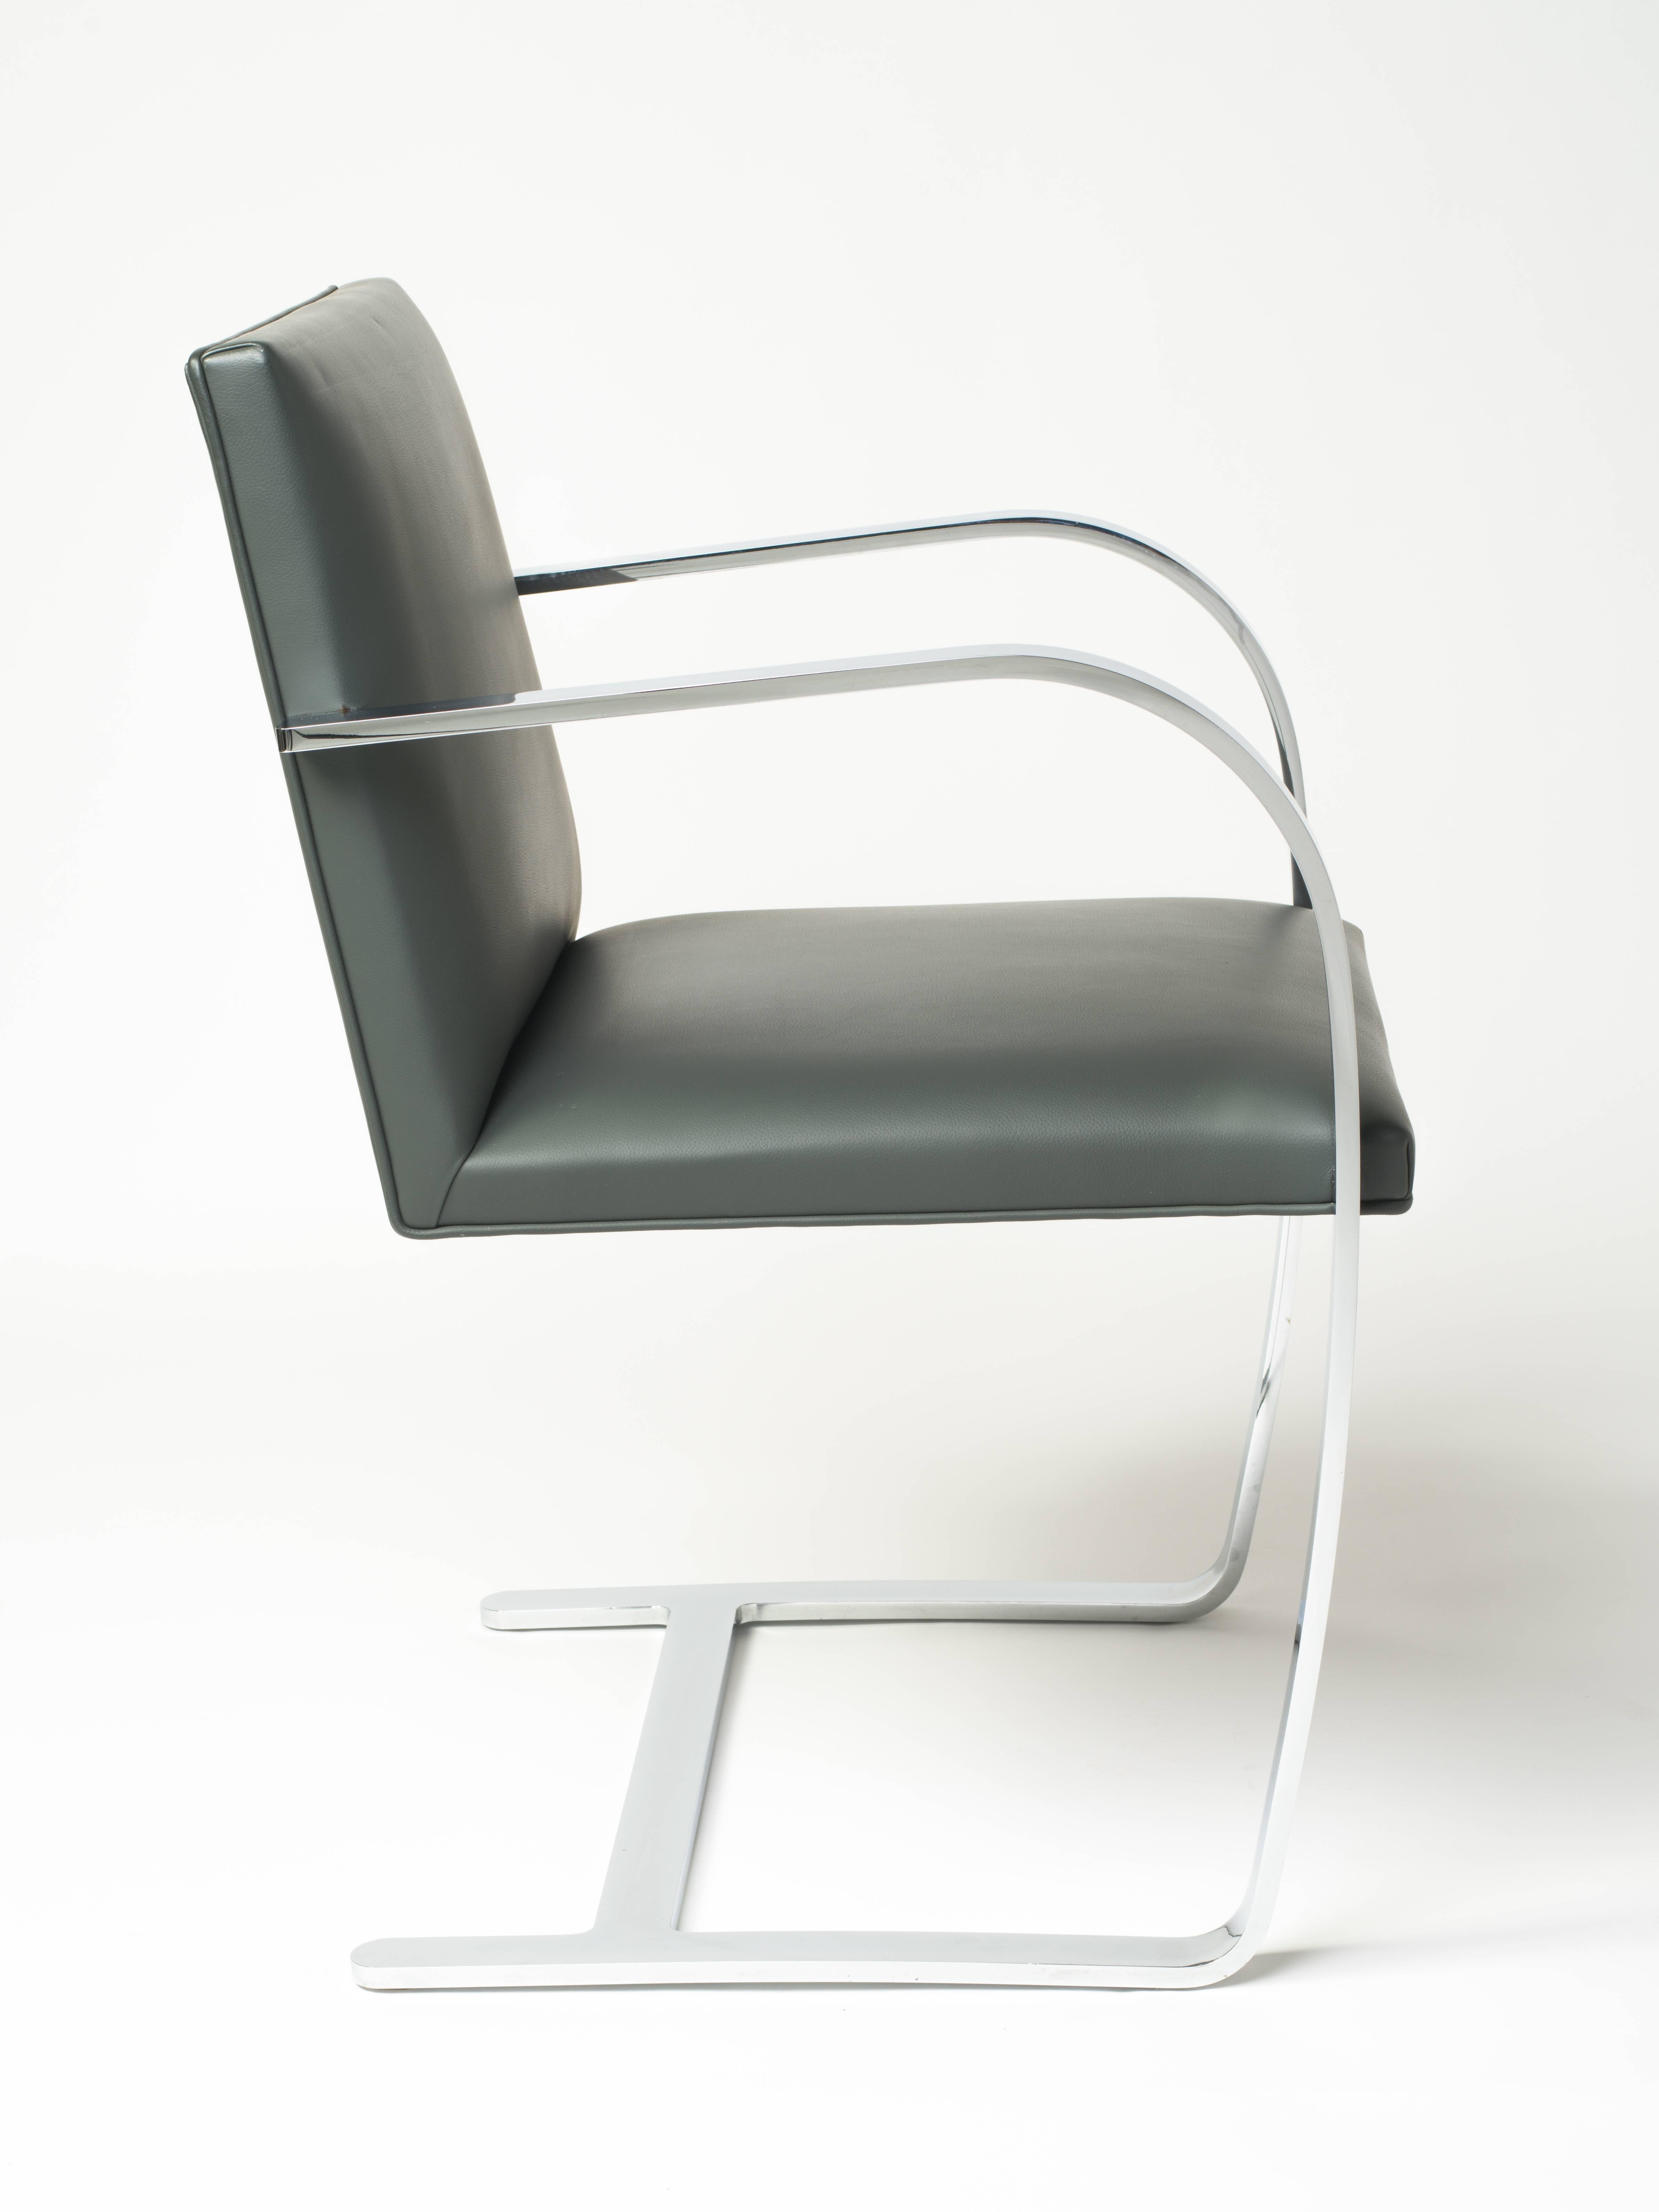 Pair of flat bar Brno chairs in elephant grey leather by Ludwig Mies van der Rohe for Knolls. Iconic Mid-Century Modern design features cantilevered steel frames with polished chrome finish. Frames have skyscraper inspired design with hidden joints